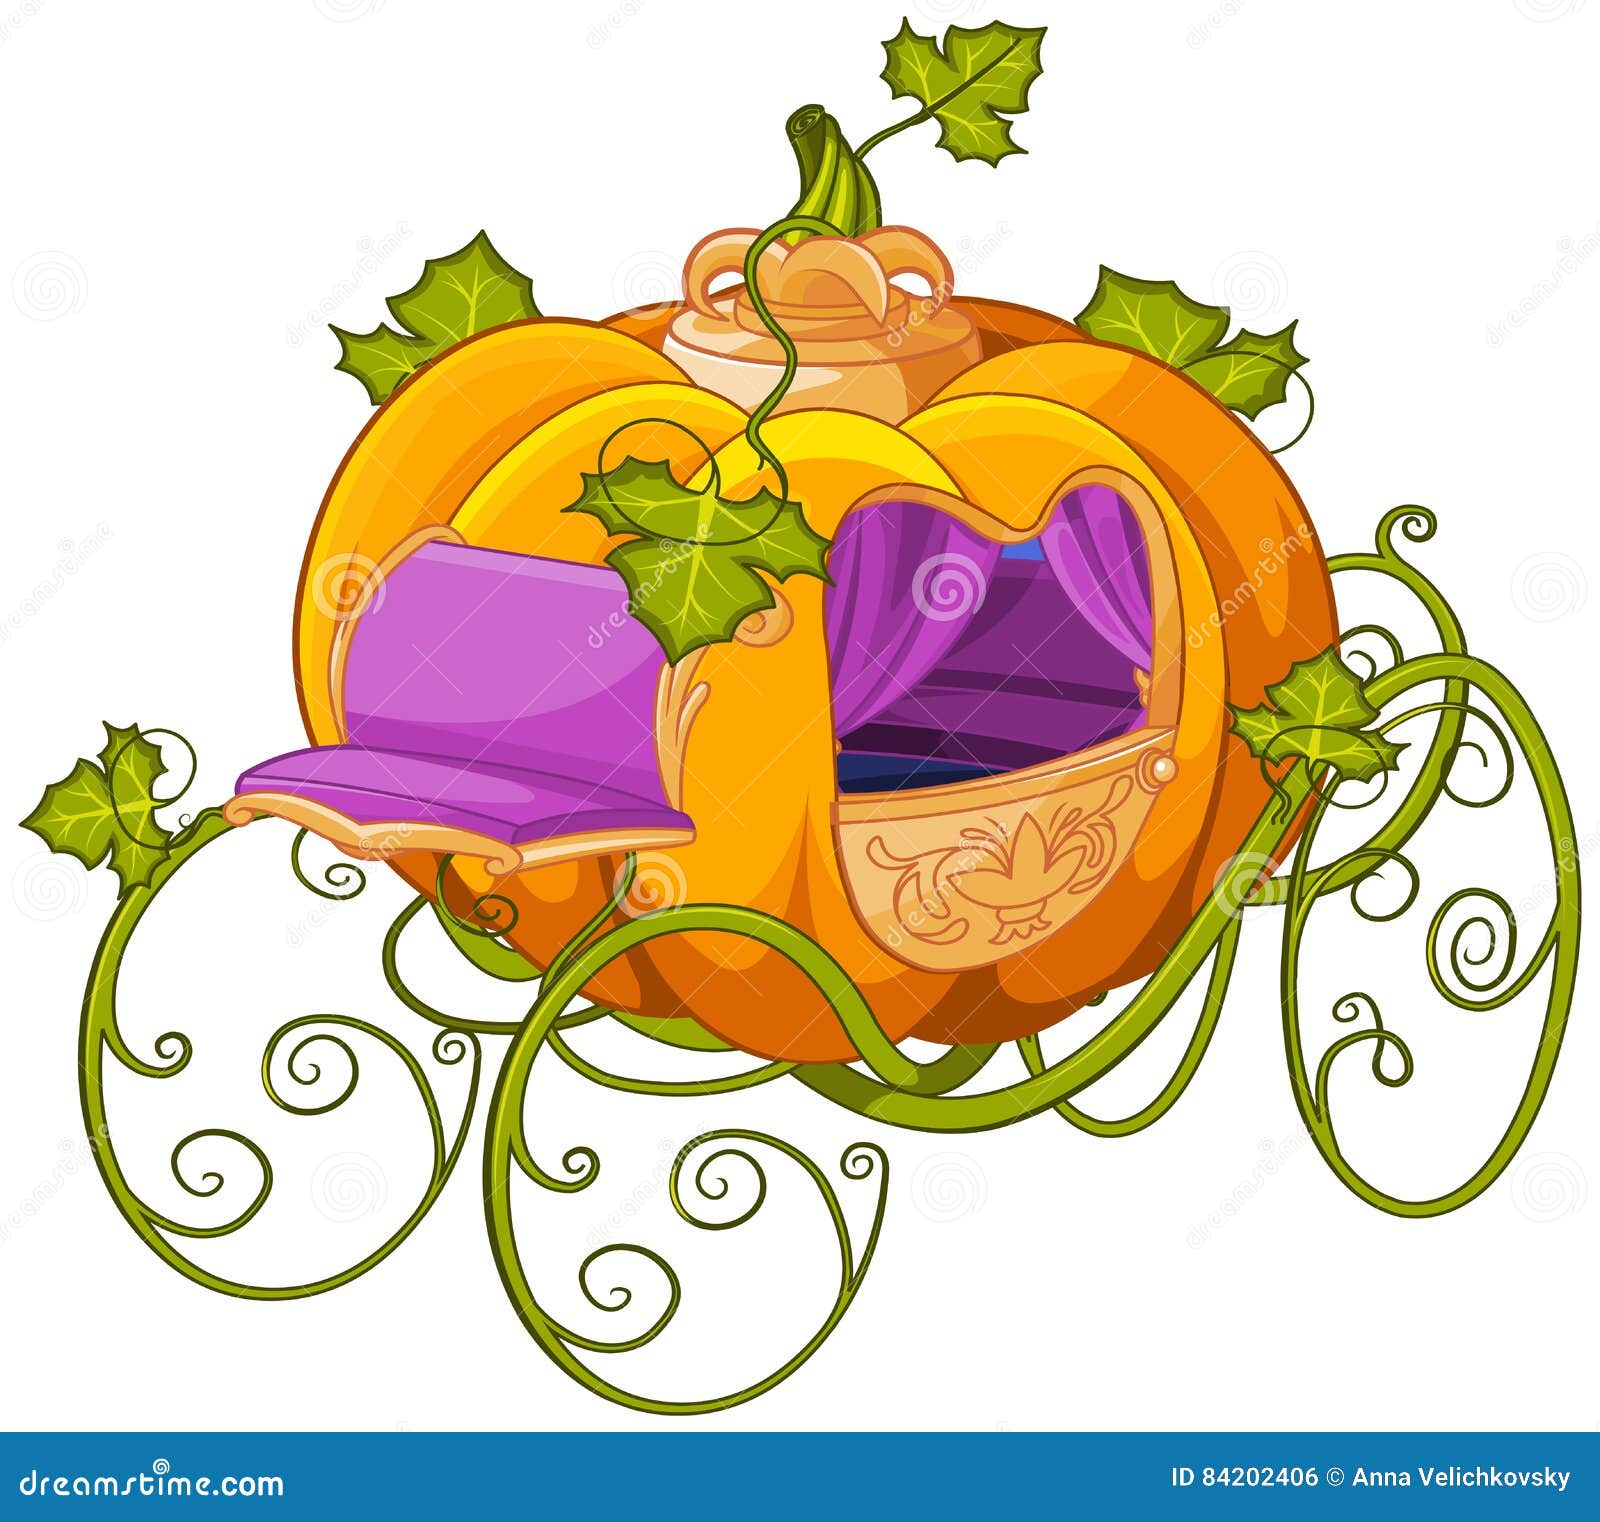 pumpkin turn into a carriage for cinderella